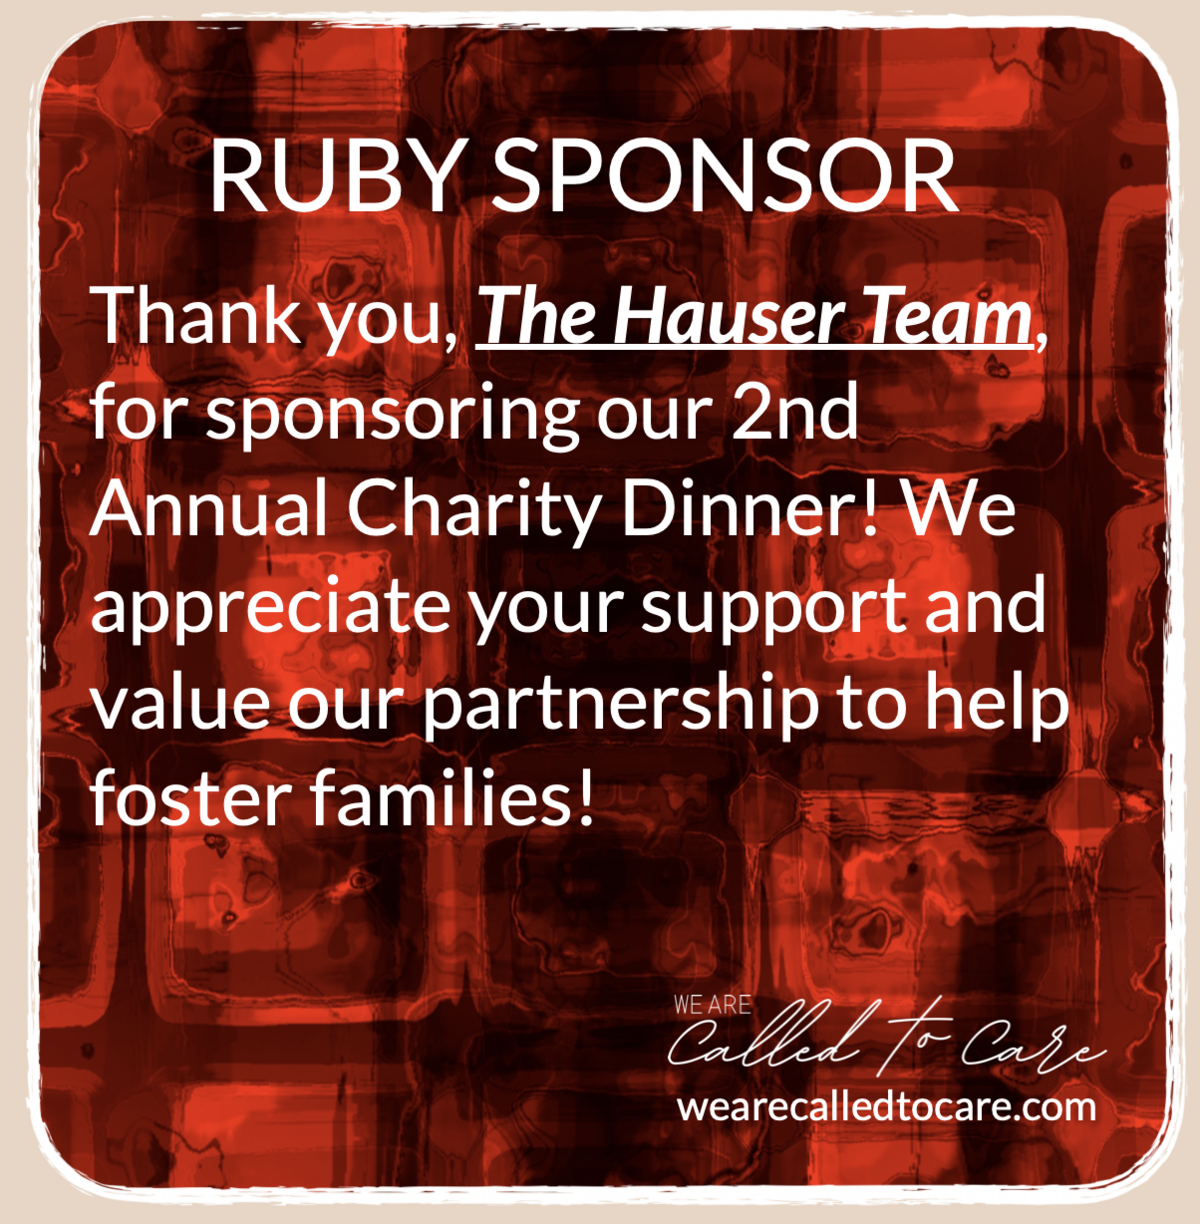 RUBY - THE HAUSER TEAM